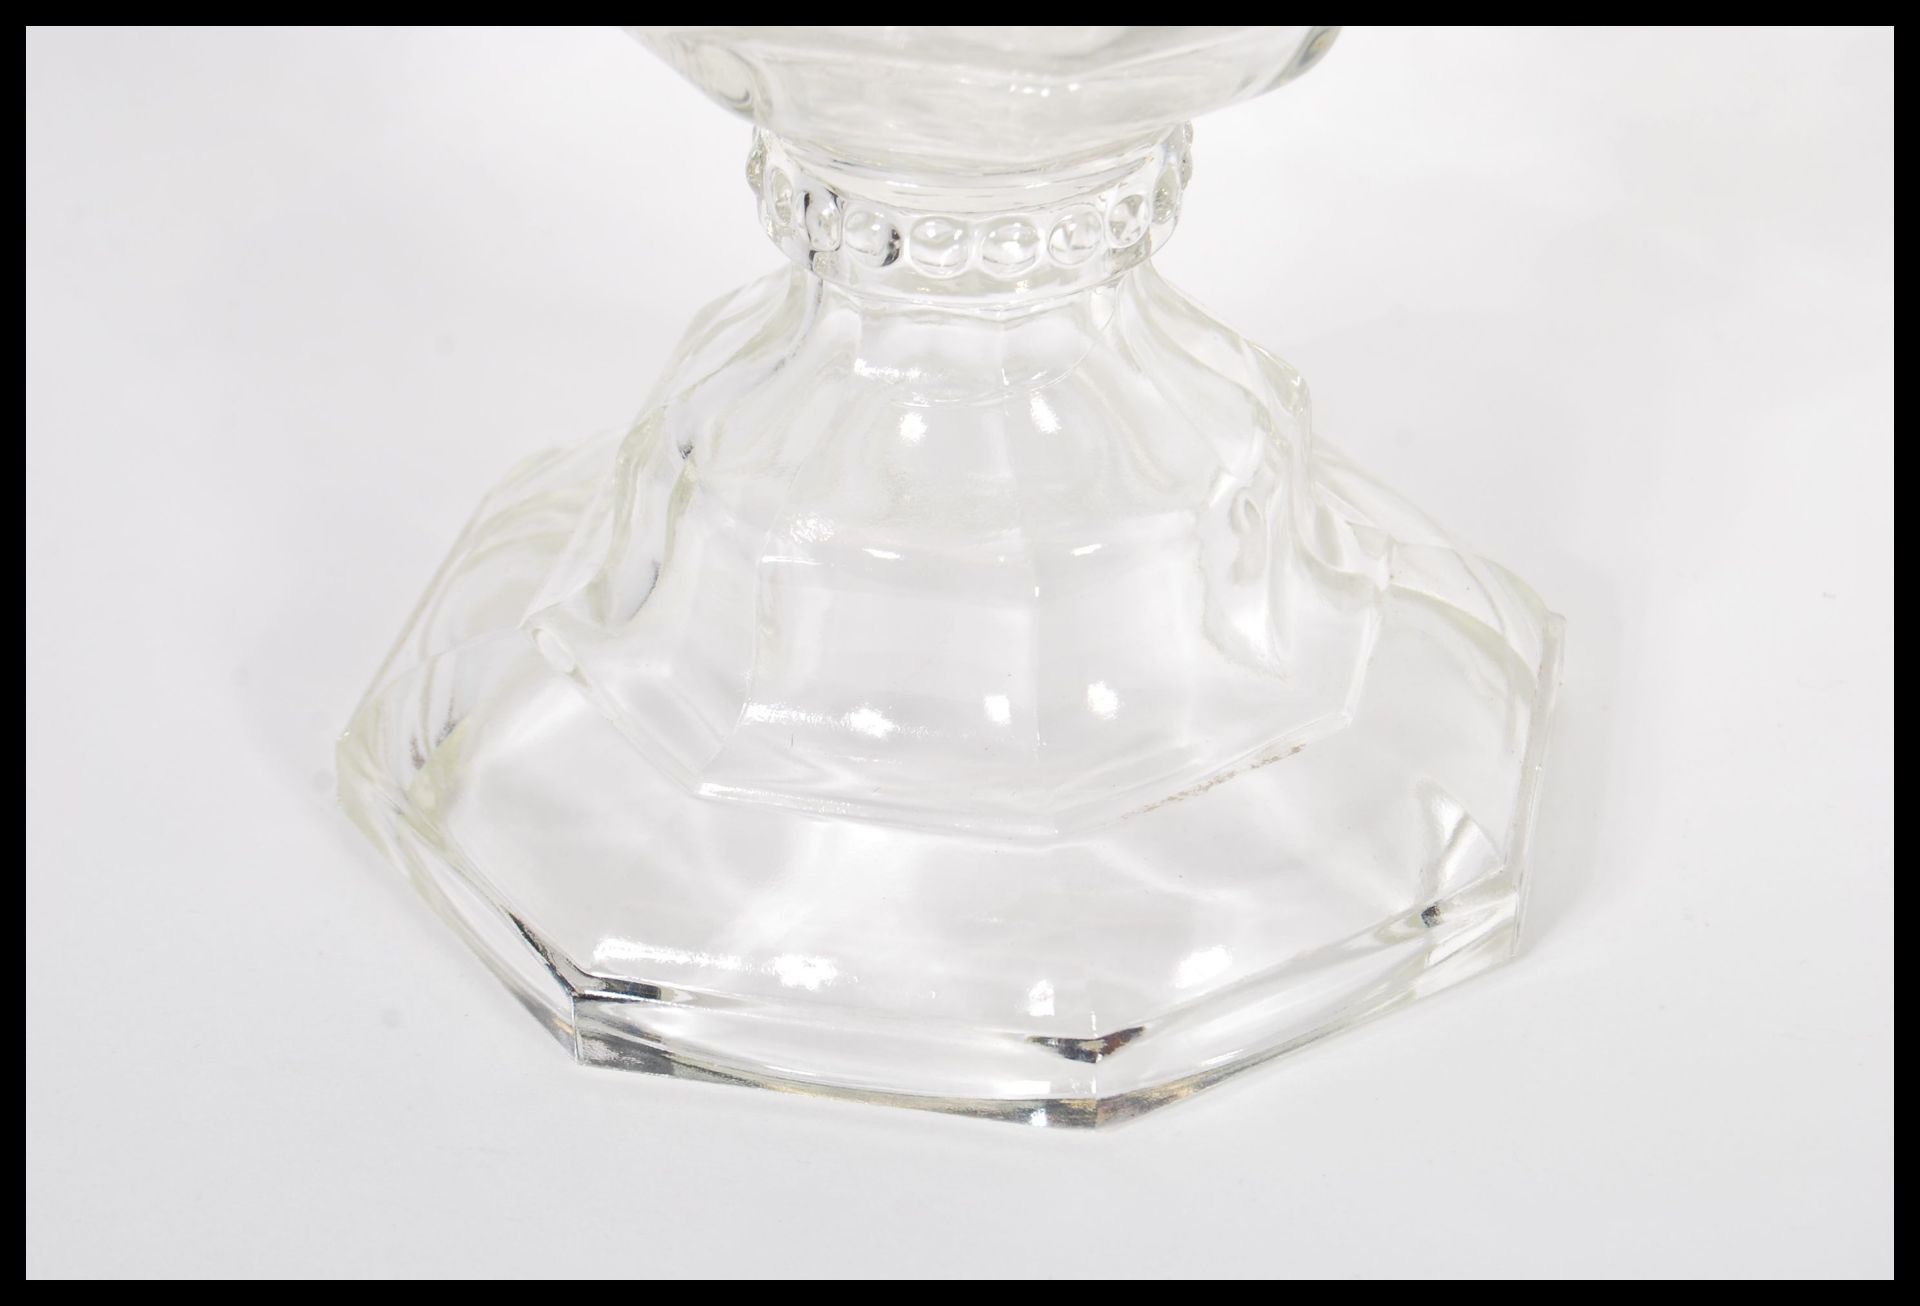 An late 19th / early 20th Century oil lamp having a clear glass and brass fittings with a flu - Bild 4 aus 4